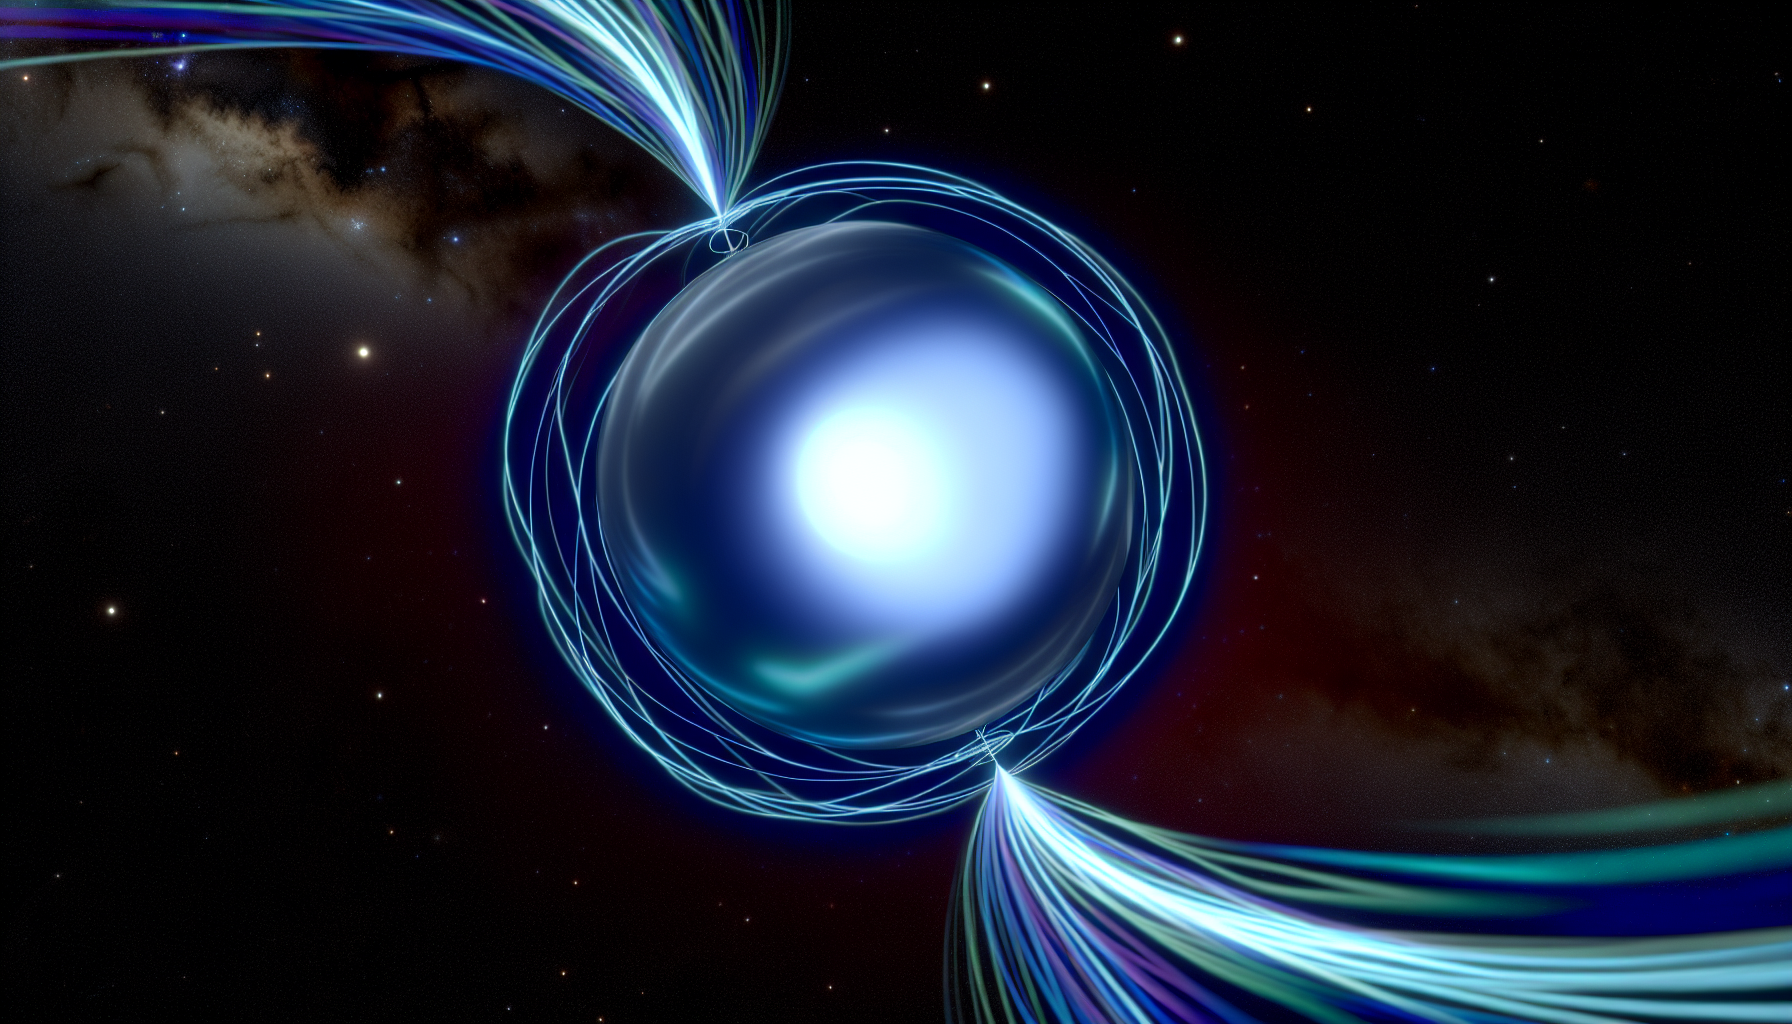 Visualization of magnetic field lines around a neutron star